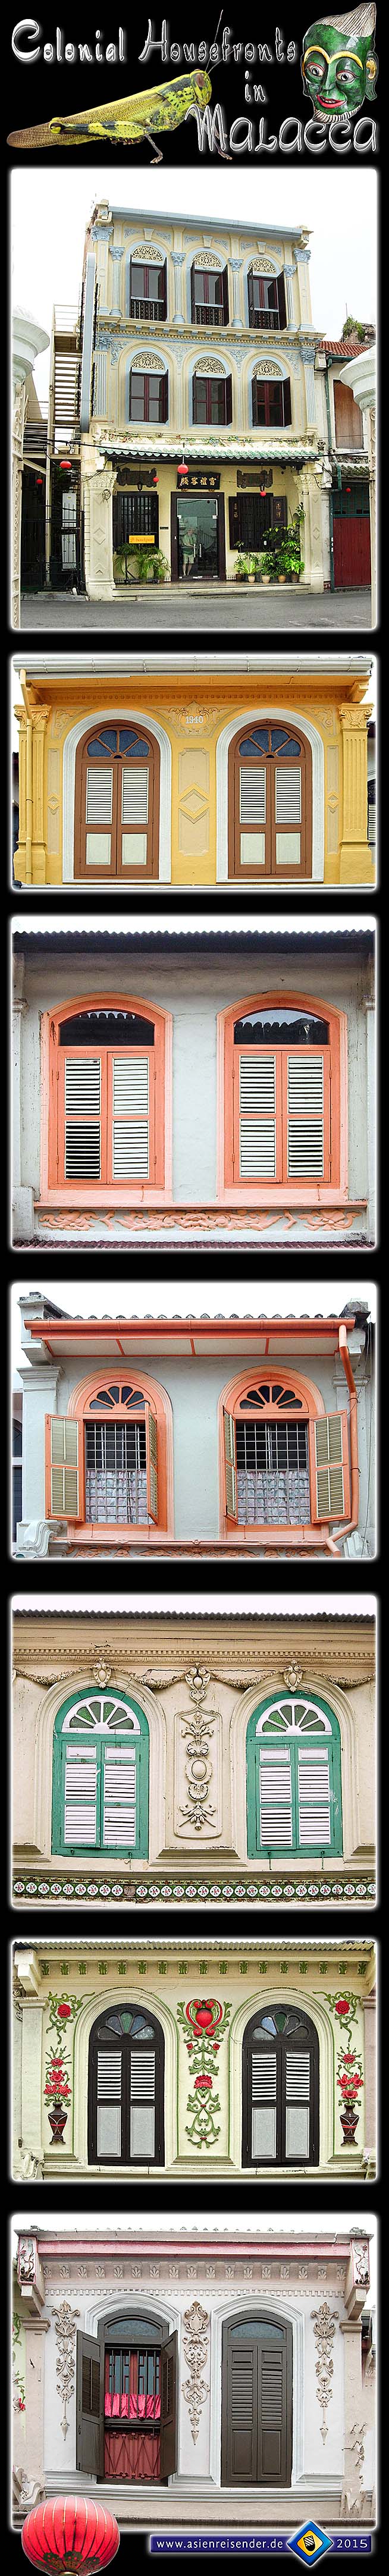 Photocomposition 'Colonial Shophouse Windows in Malacca' by Asienreisender